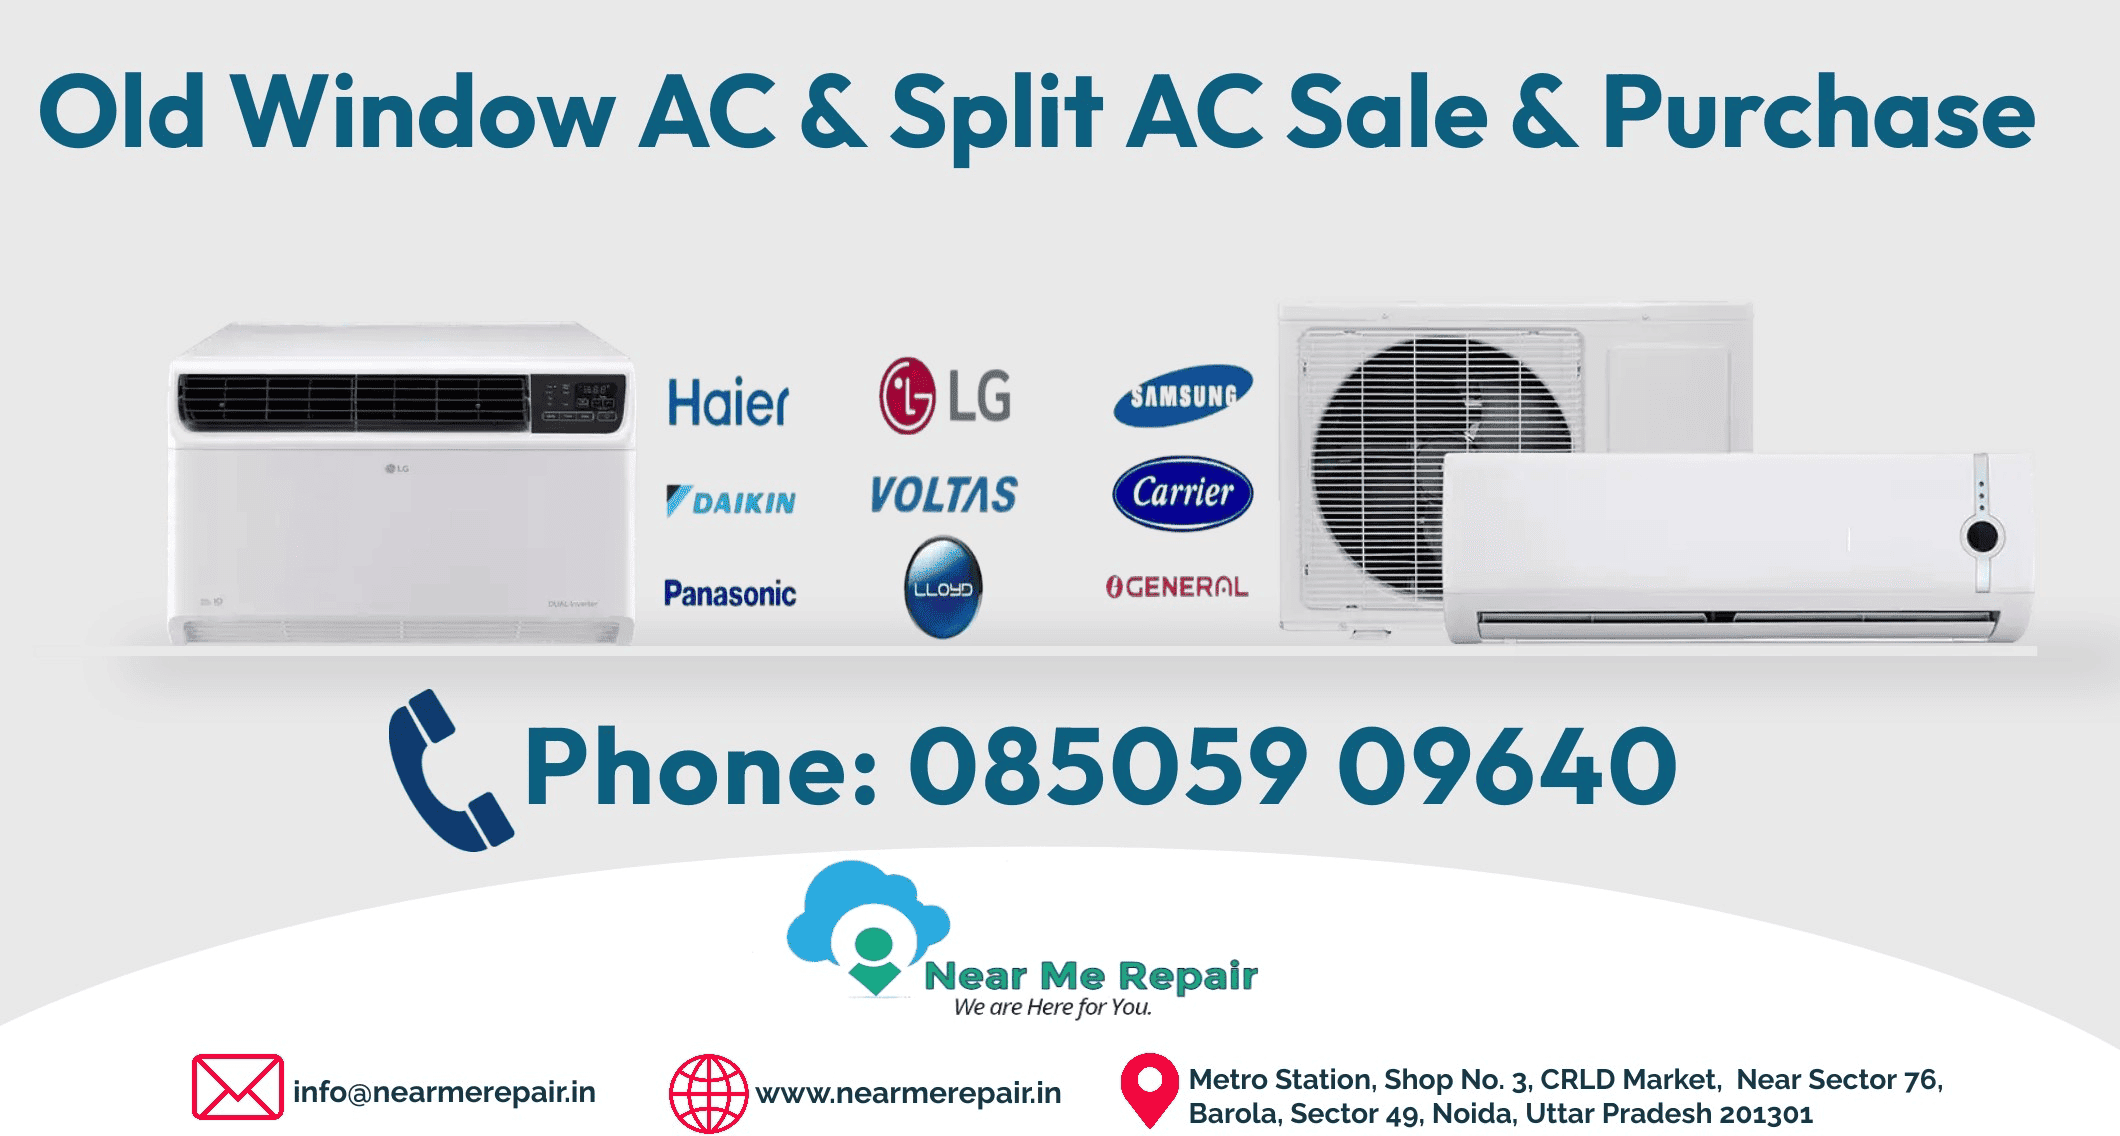 Effortless transactions for buying and selling pre-owned Window ACs or Split ACs near Delhi-NCR.